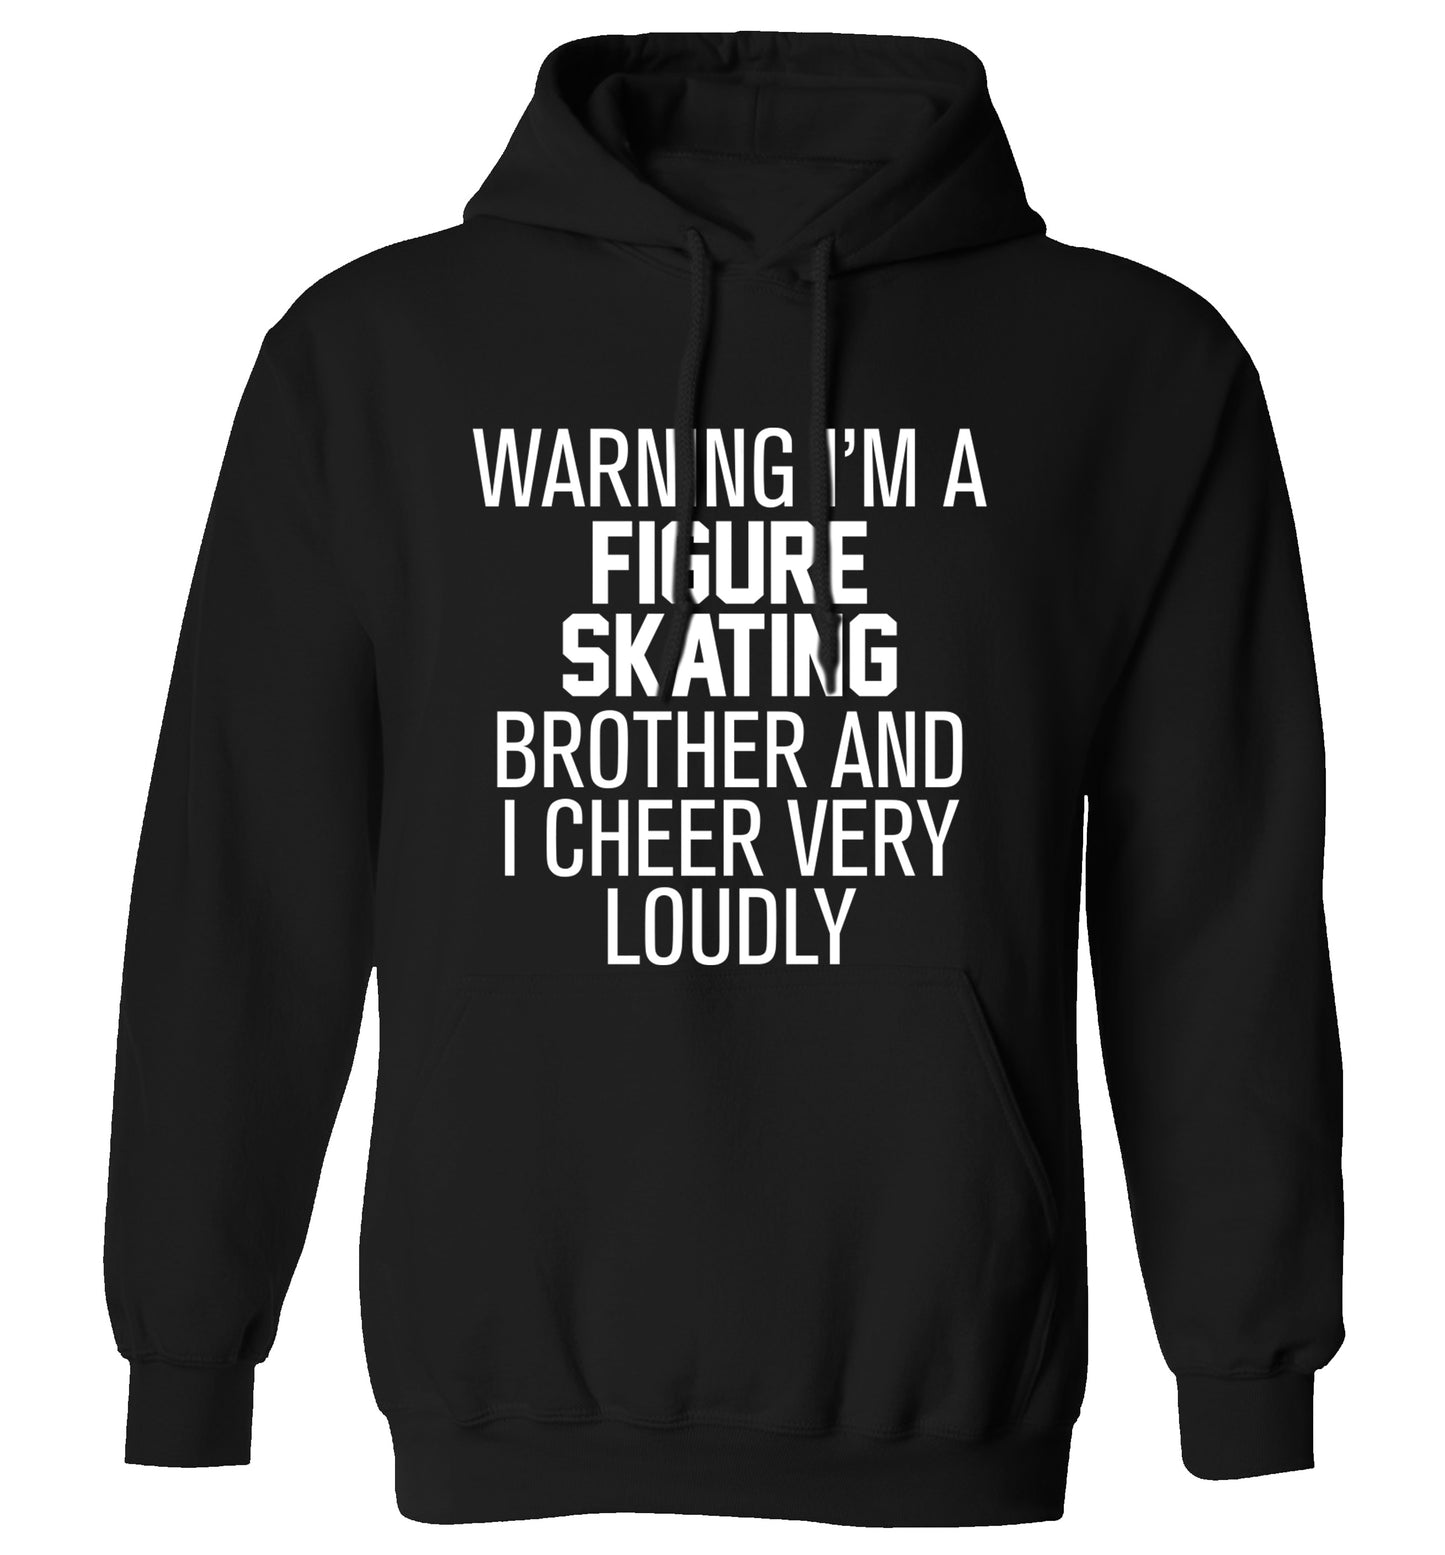 Warning I'm a figure skating brother and I cheer very loudly adults unisexblack hoodie 2XL